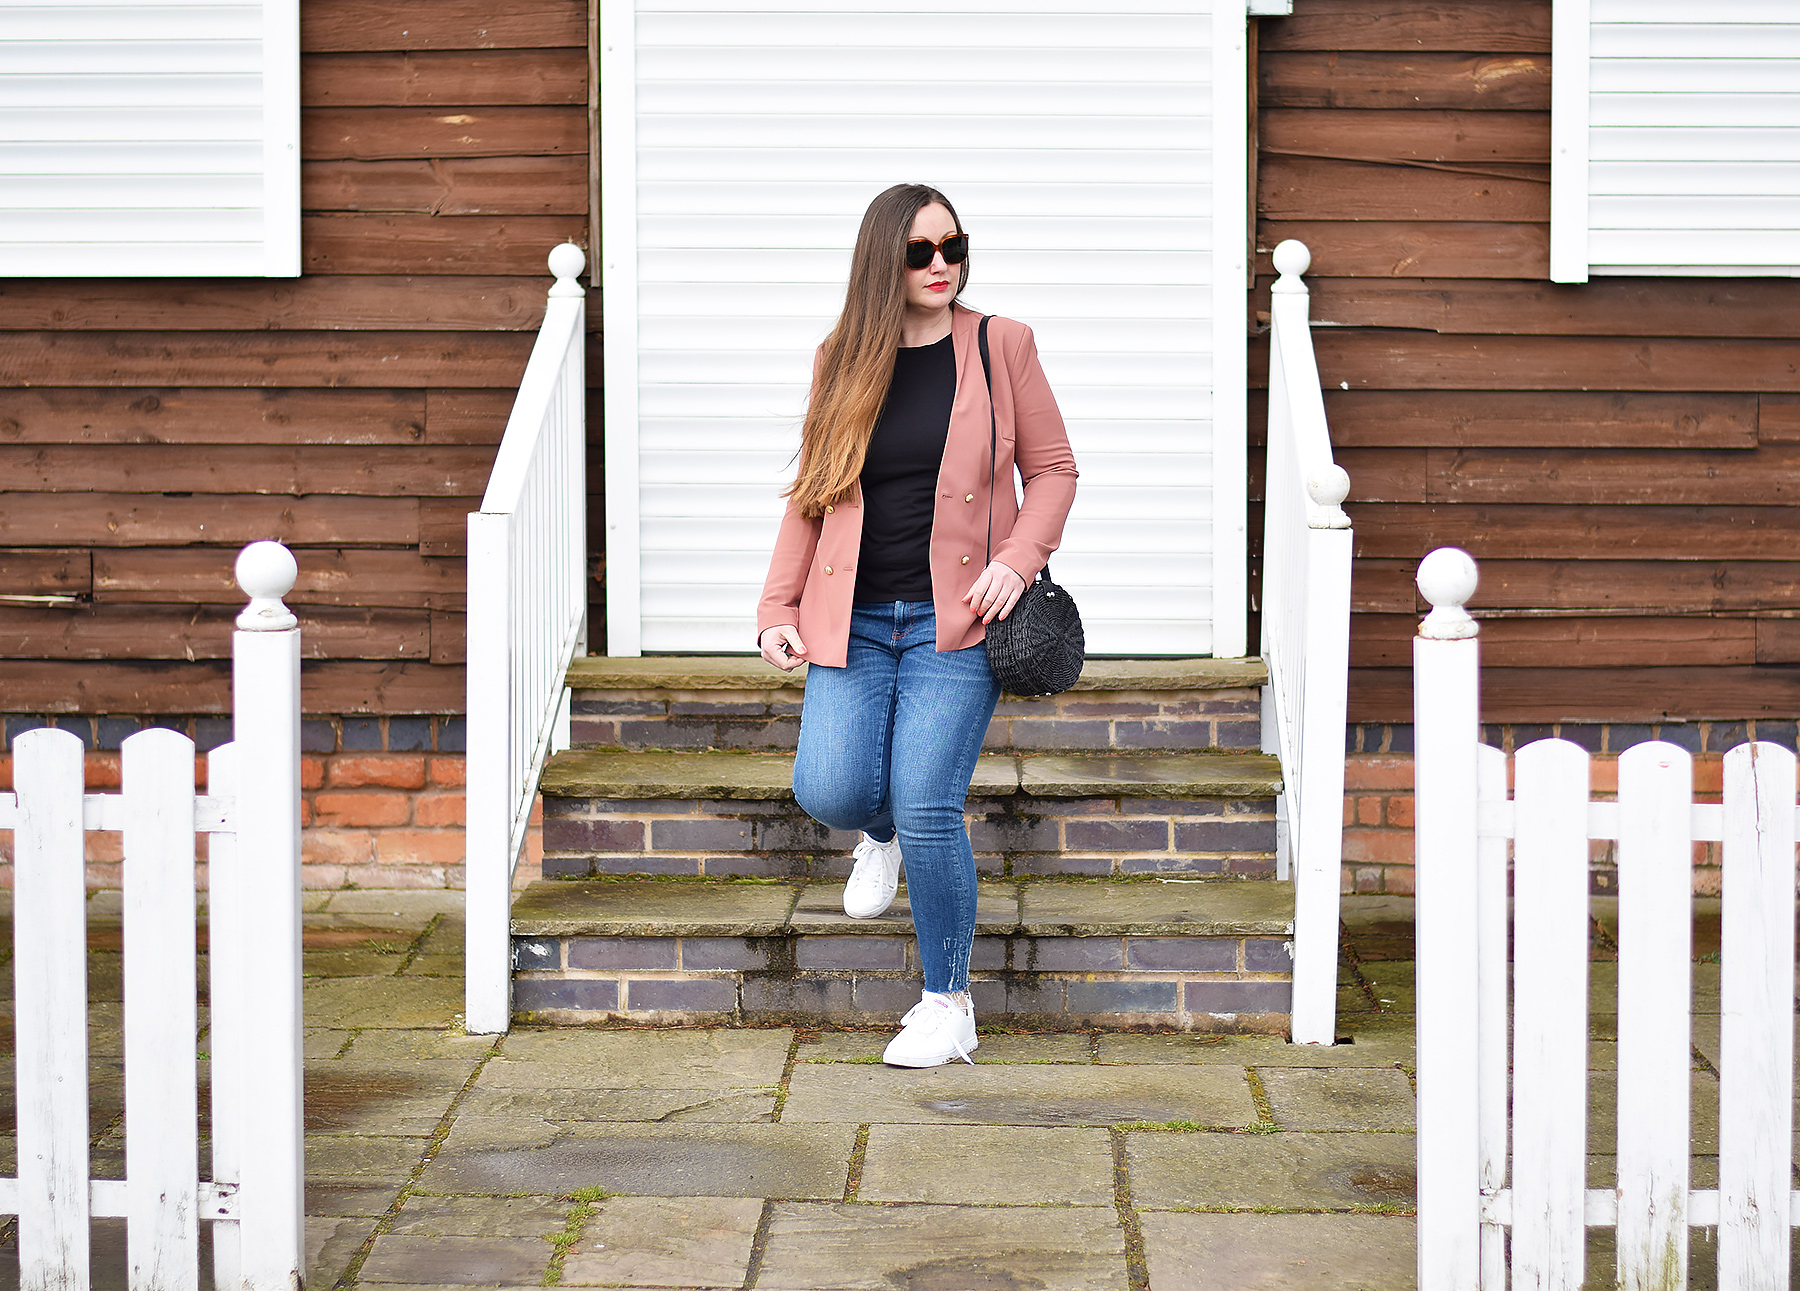 Zara terracotta blazer and jeans with trainers and a basket bag